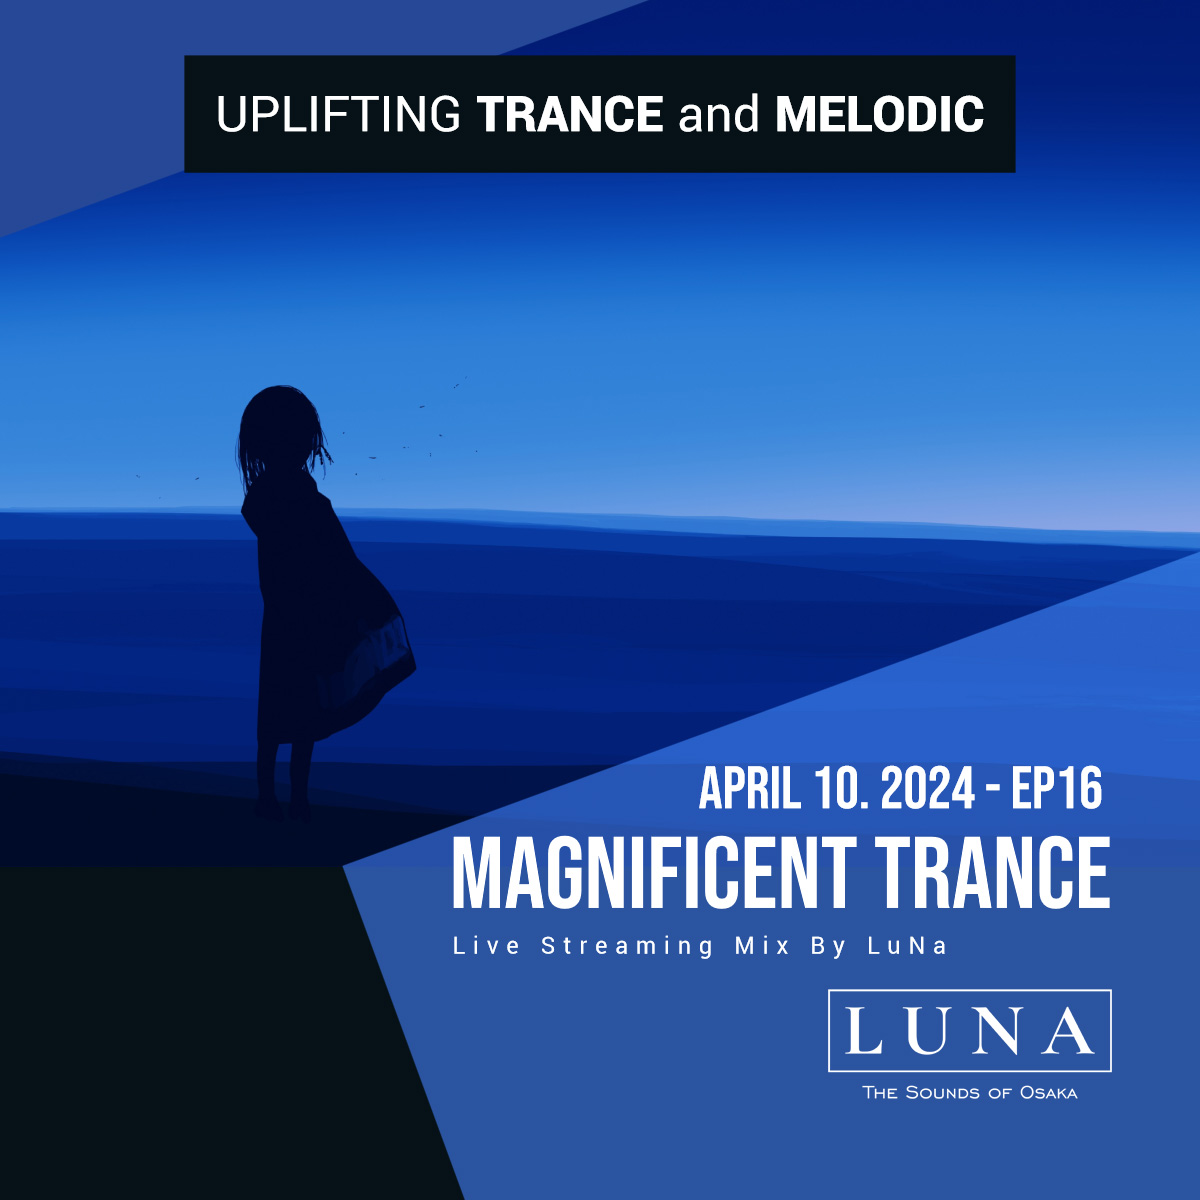 Hi friends, it's time again for a new trance show.
selection and mixed by LuNa.
Plz try listening to this song if you like:)
Magnificent Trance16 Mixed by LuNa
Wednesday 10th. April 2024
mixcloud.com/lunashimada/ma…
#upliftingtrance #trancefamily #japaneseartist